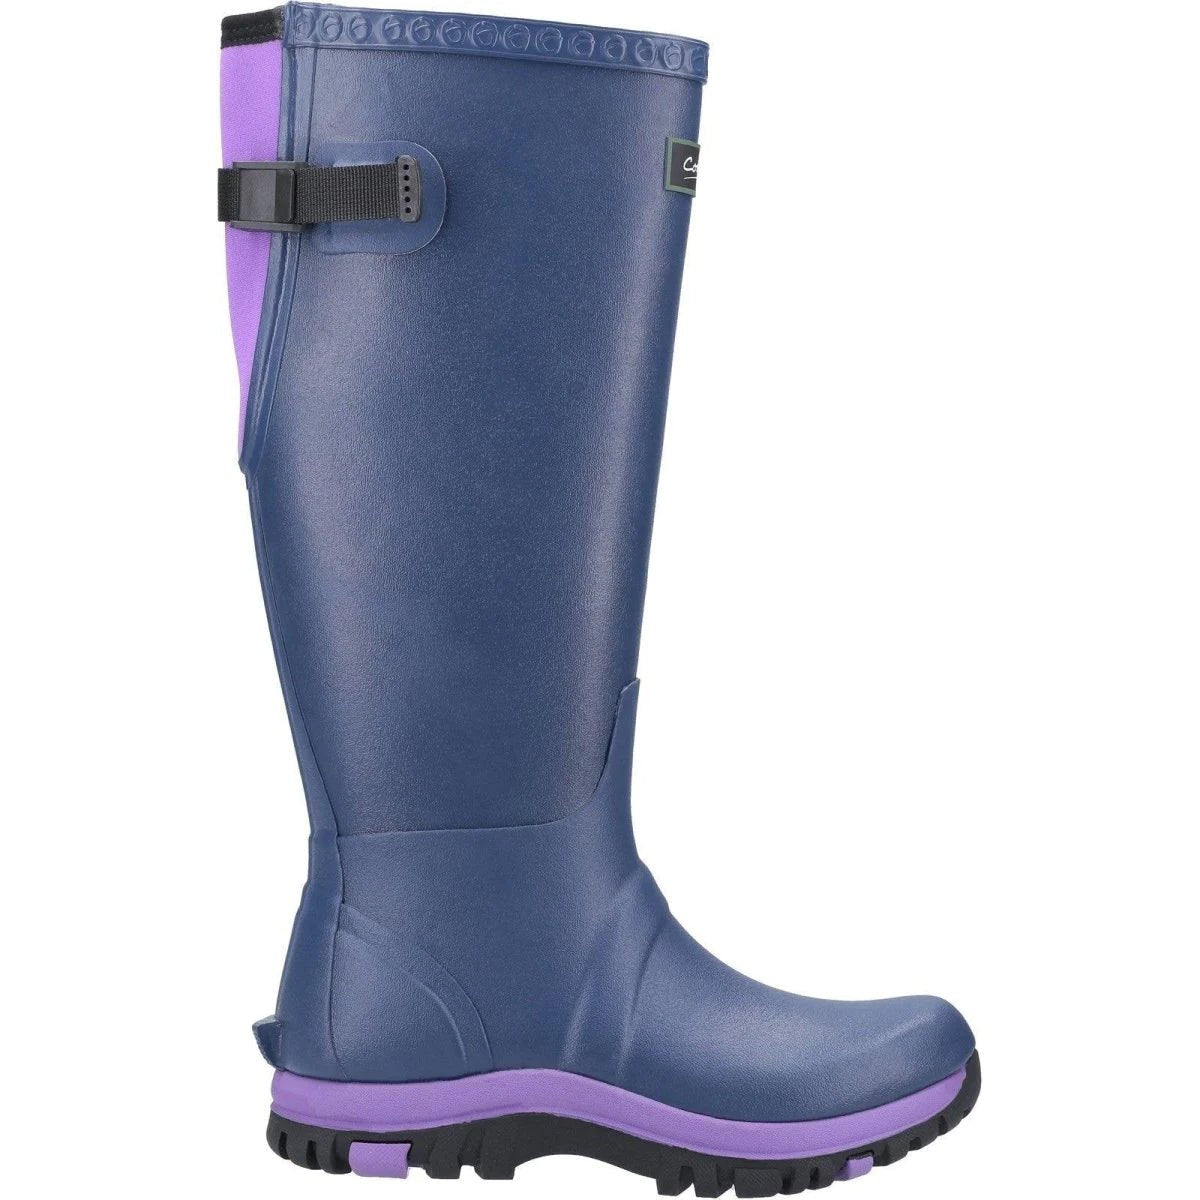 Cotswold Realm Womens Wellington Boots - Shoe Store Direct